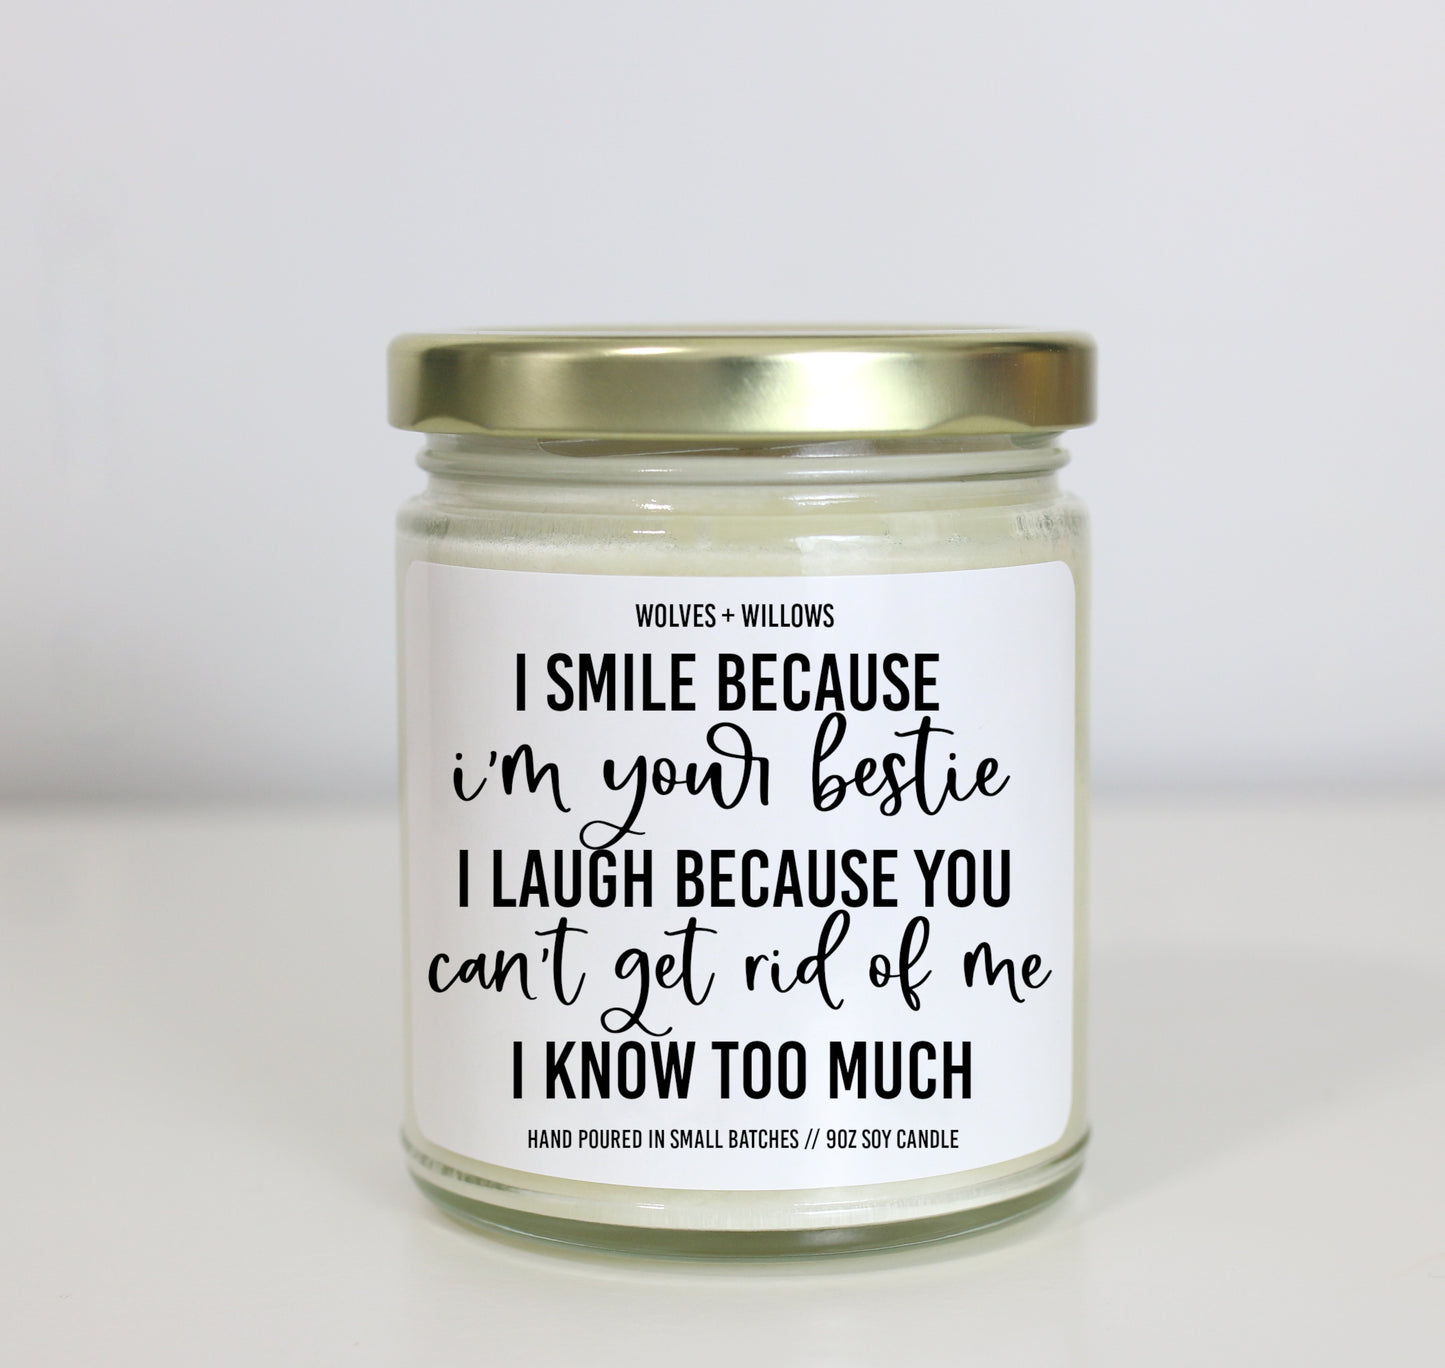 I Smile Because I'm Your Bestie I Laugh Because You Can't Get Rid of Me I Know Too Much Soy Candle - Choose Your Scent - Best Friend Gift